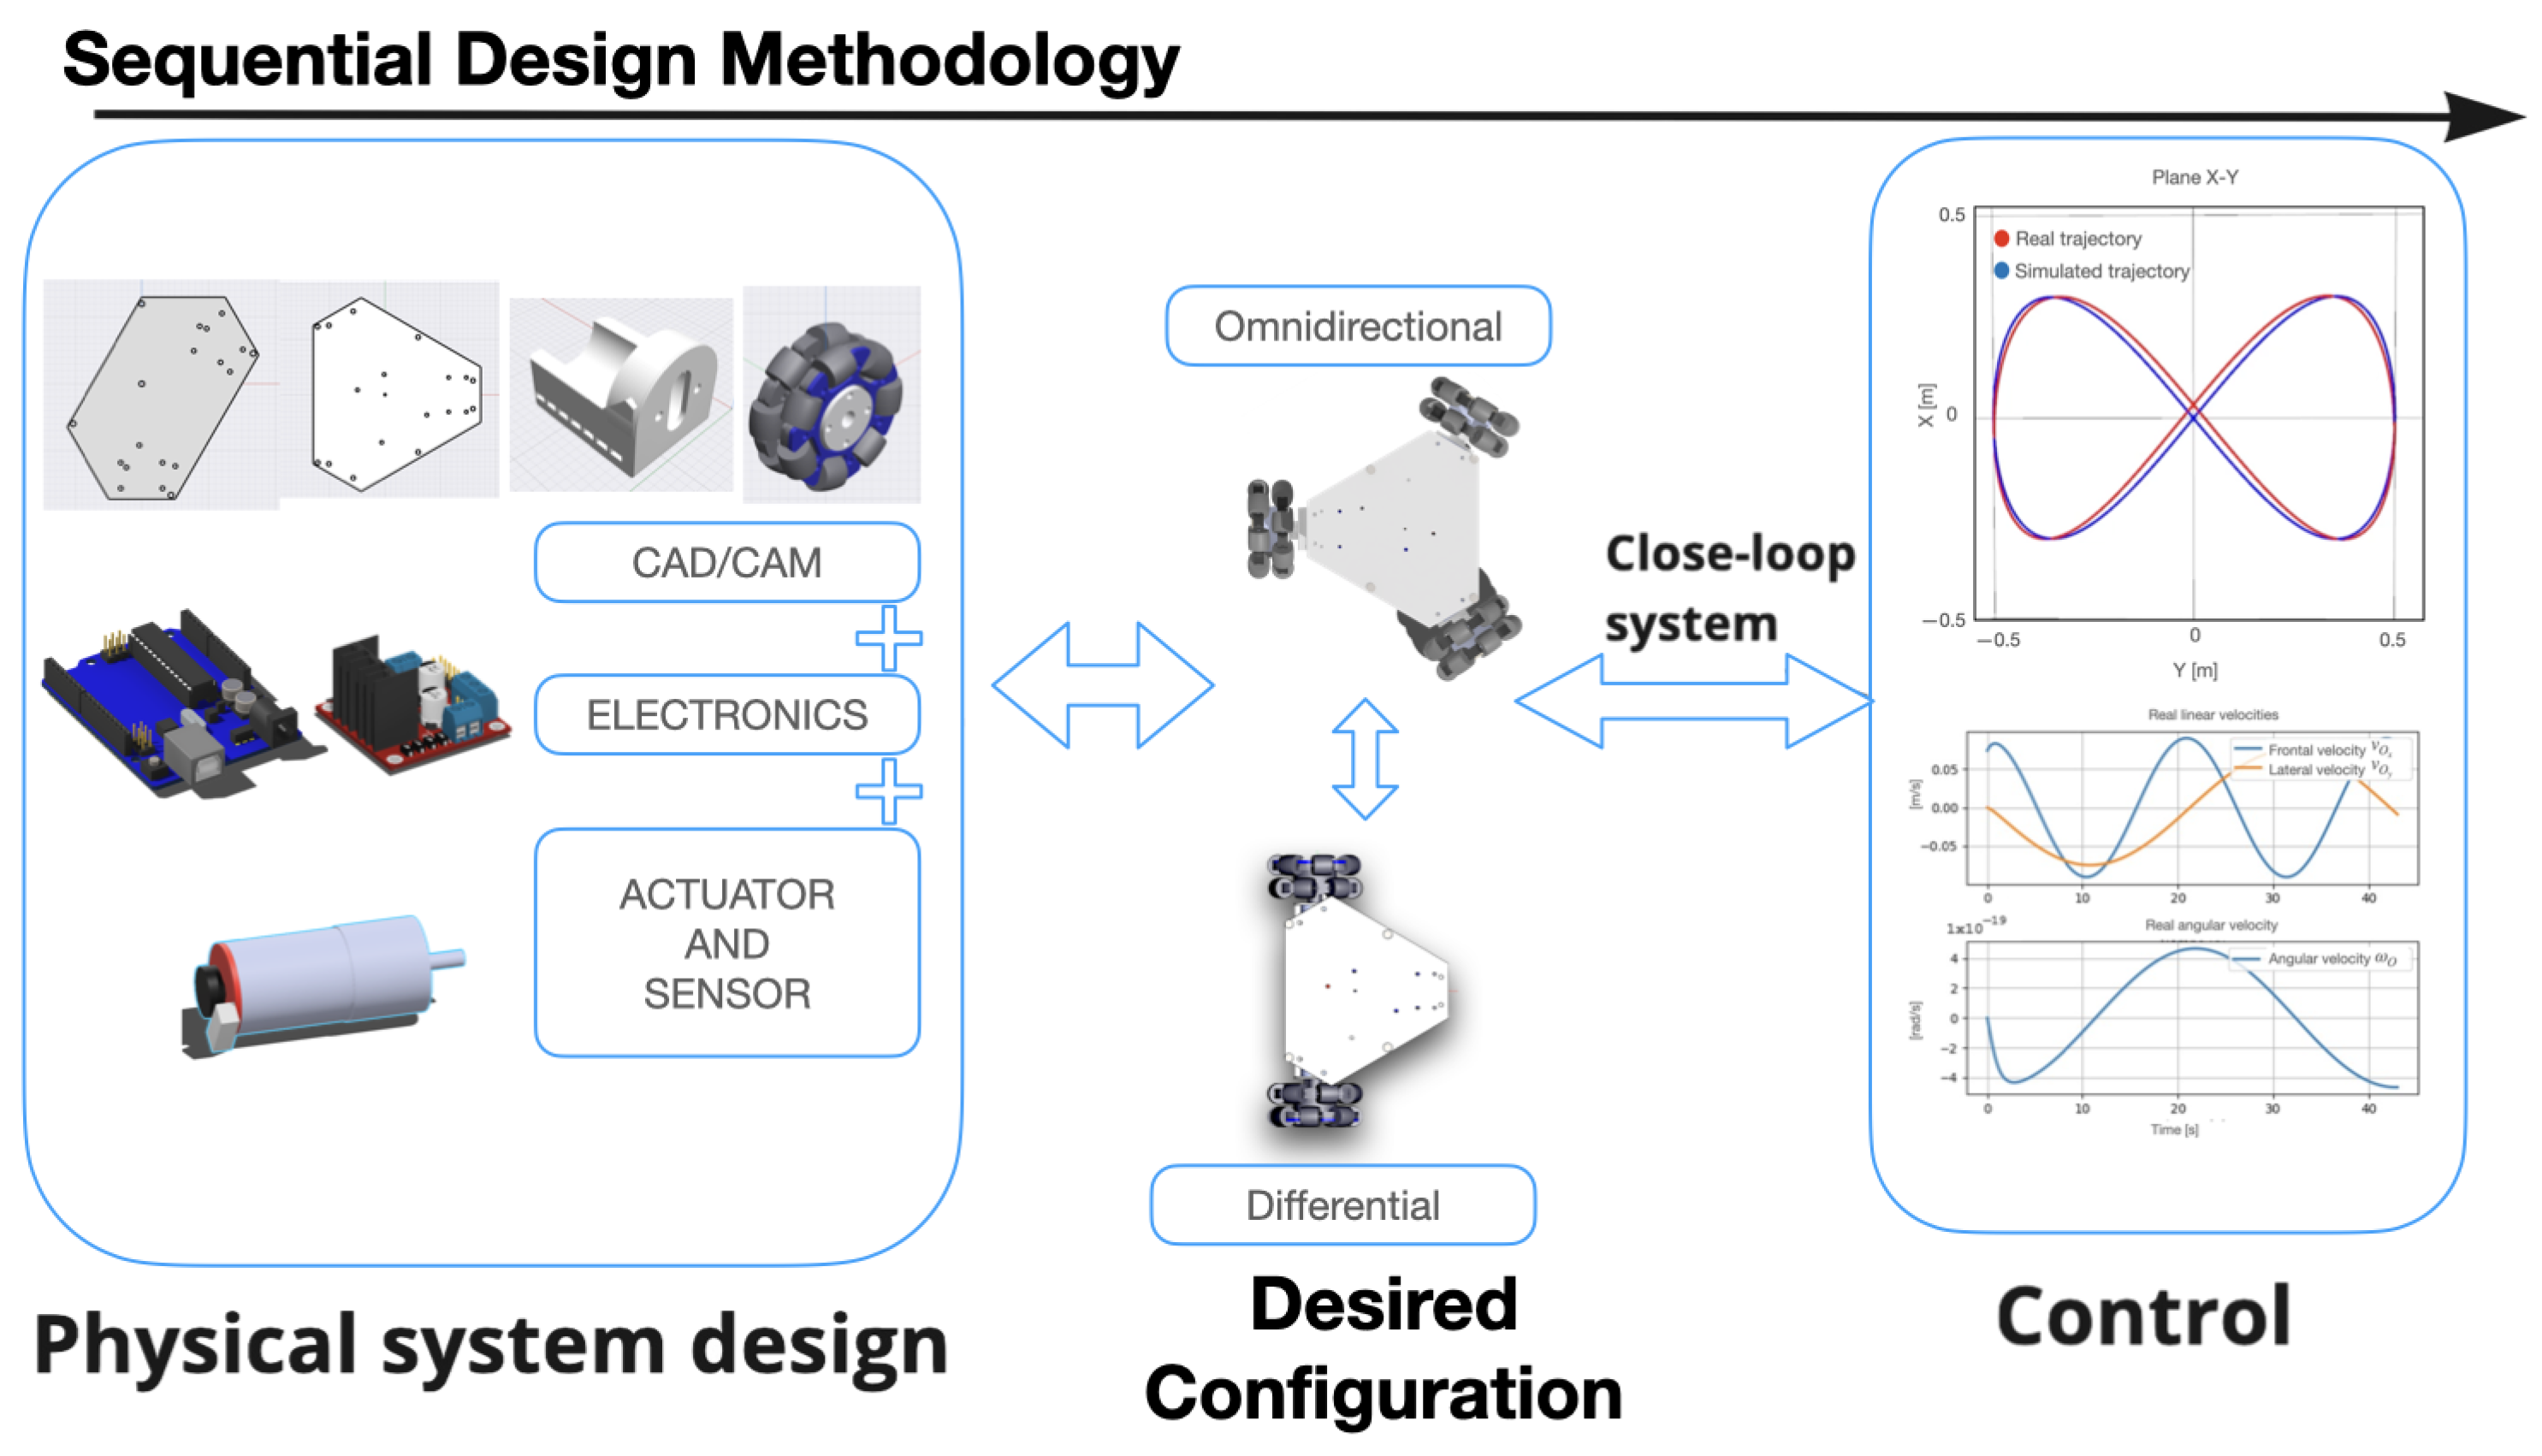 How motion control systems drives innovation in additive manufacturing -  Medical Plastics News